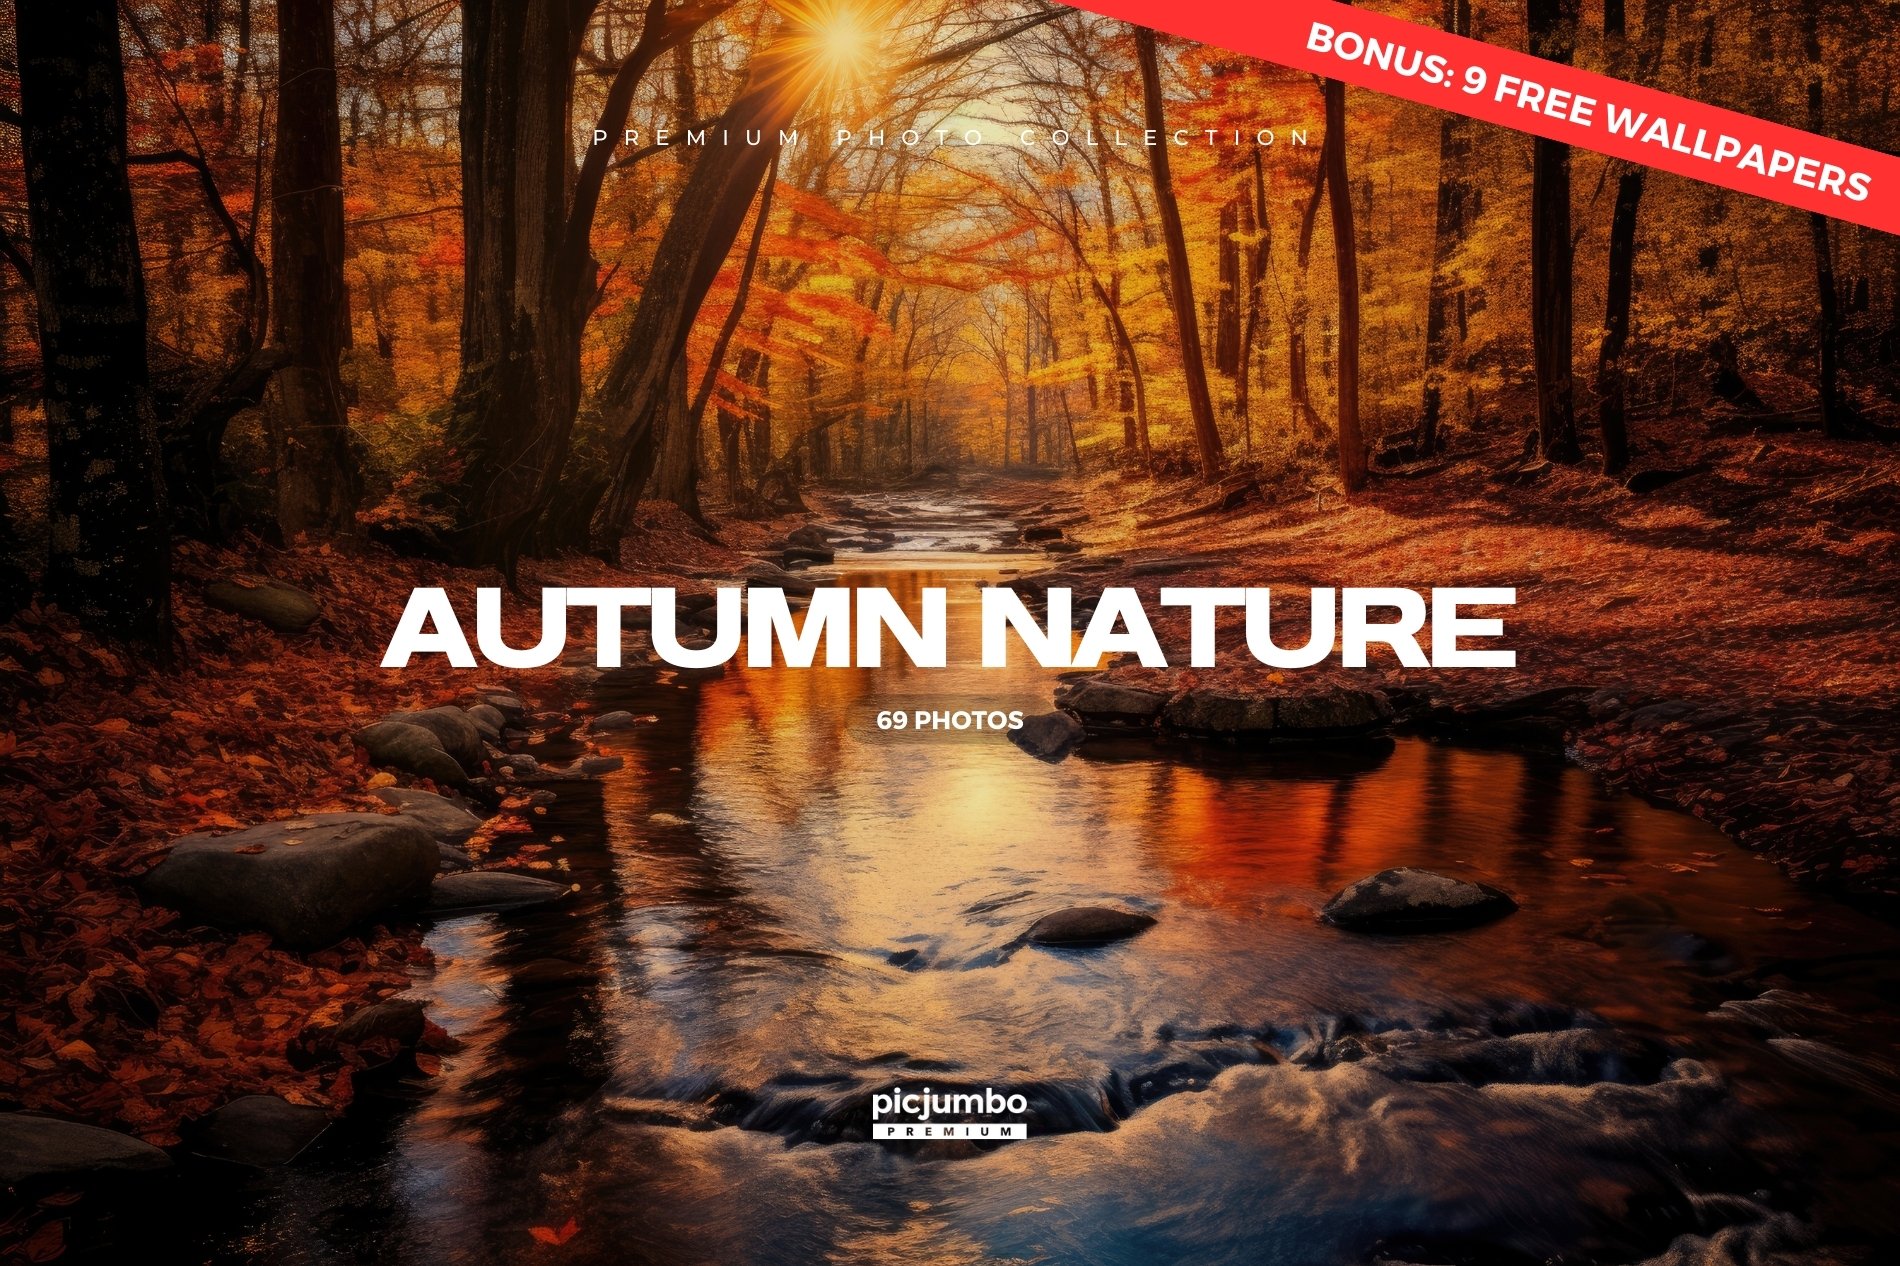 Download hi-res stock photos from our Autumn Nature PREMIUM Collection!